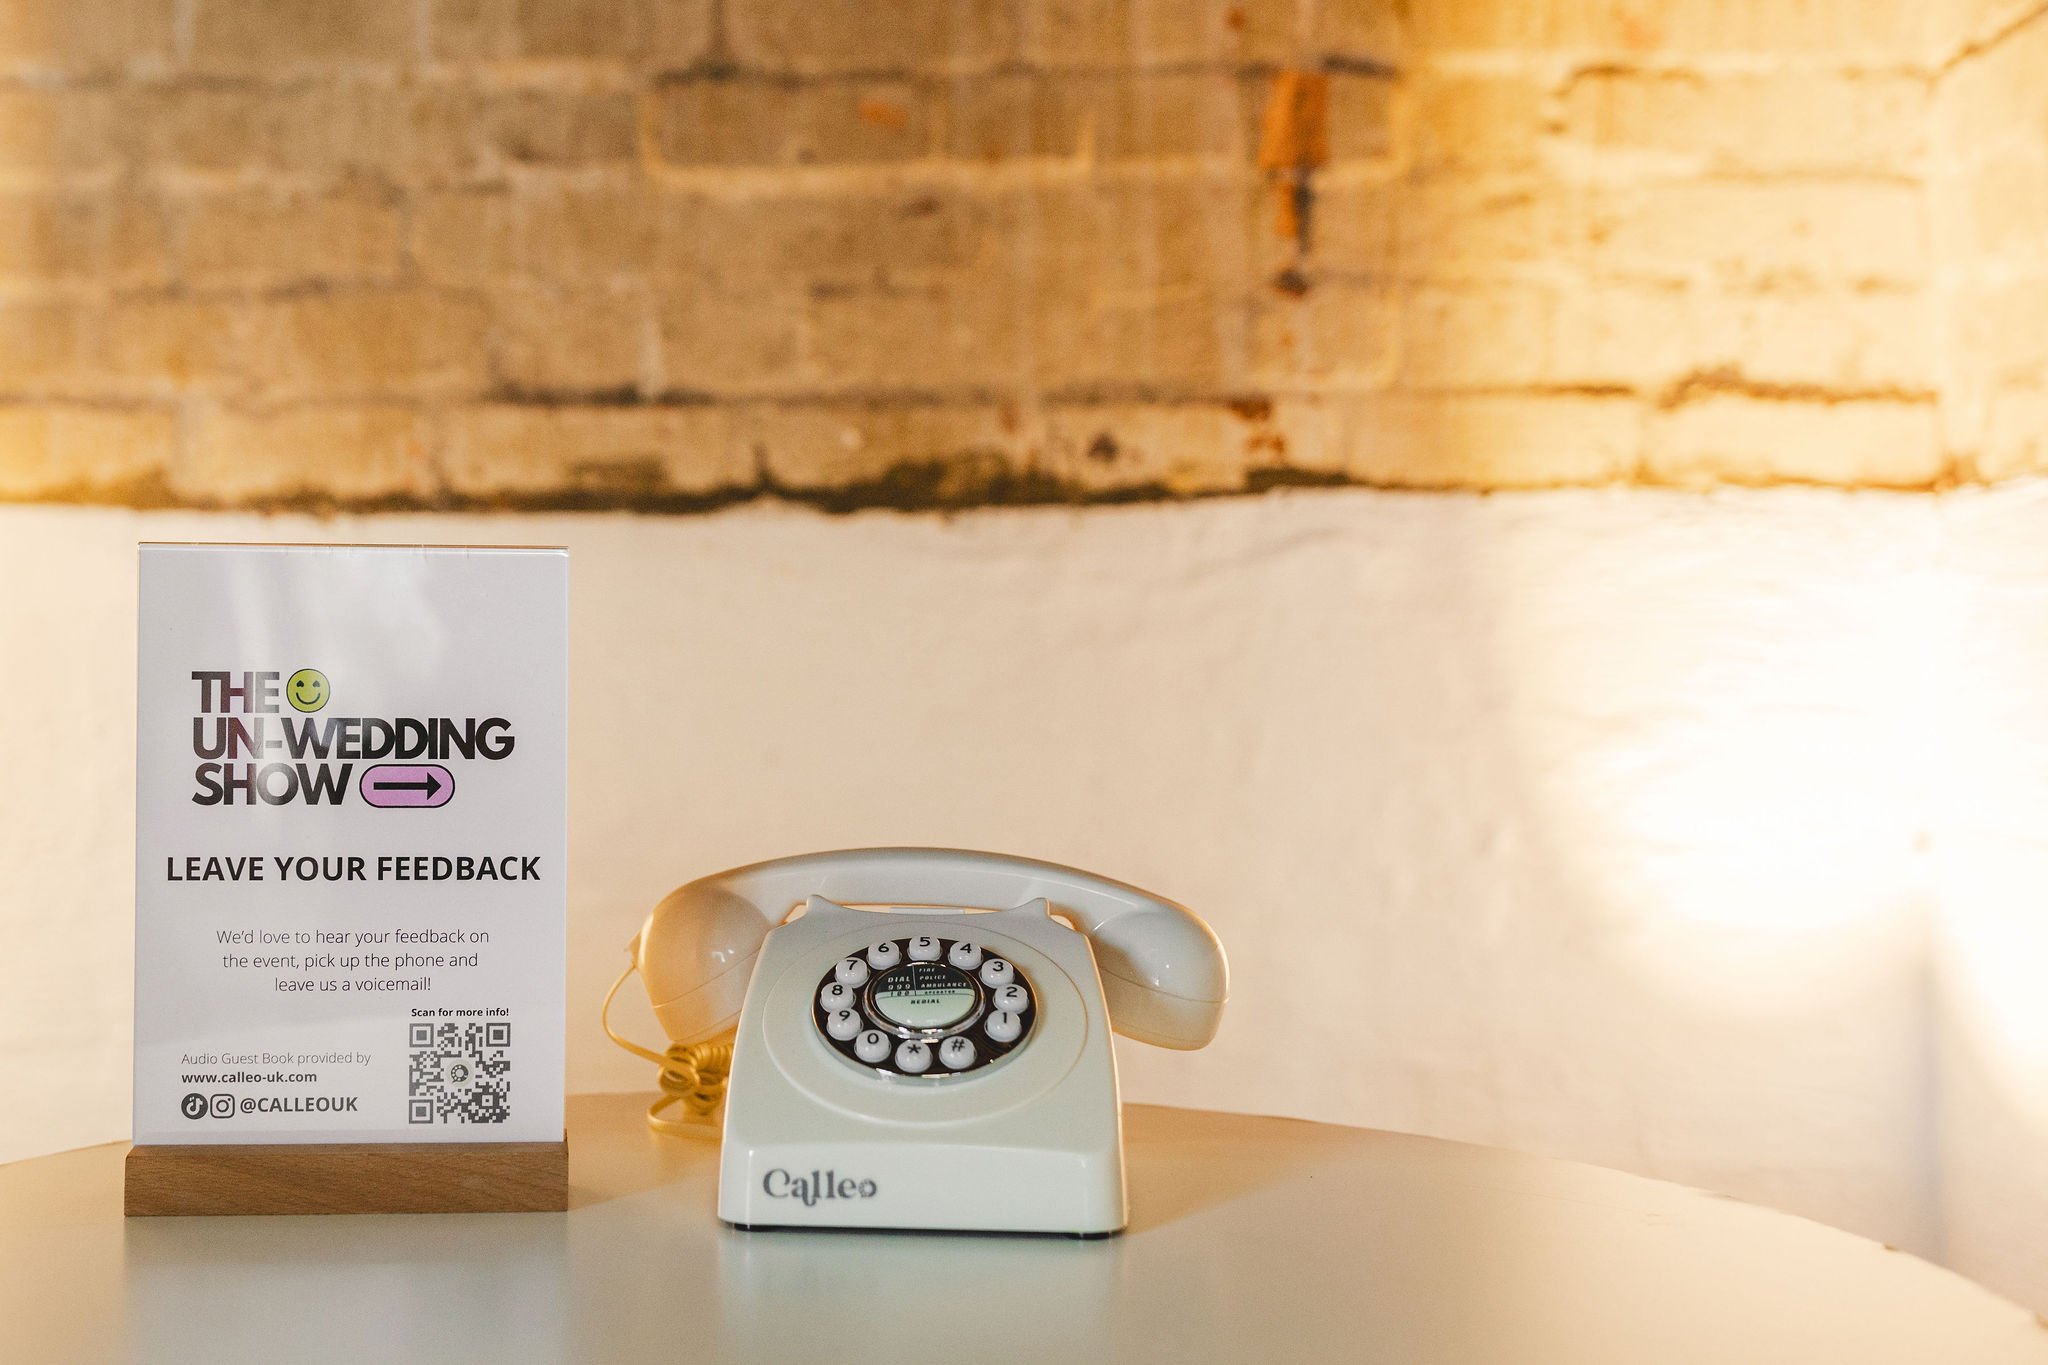  The cream retro Calleo phone is displayed on a table in an exposed brick recess within Paintworks, Bristol where attendees and suppliers can leave feedback about The Un-Wedding Show. 